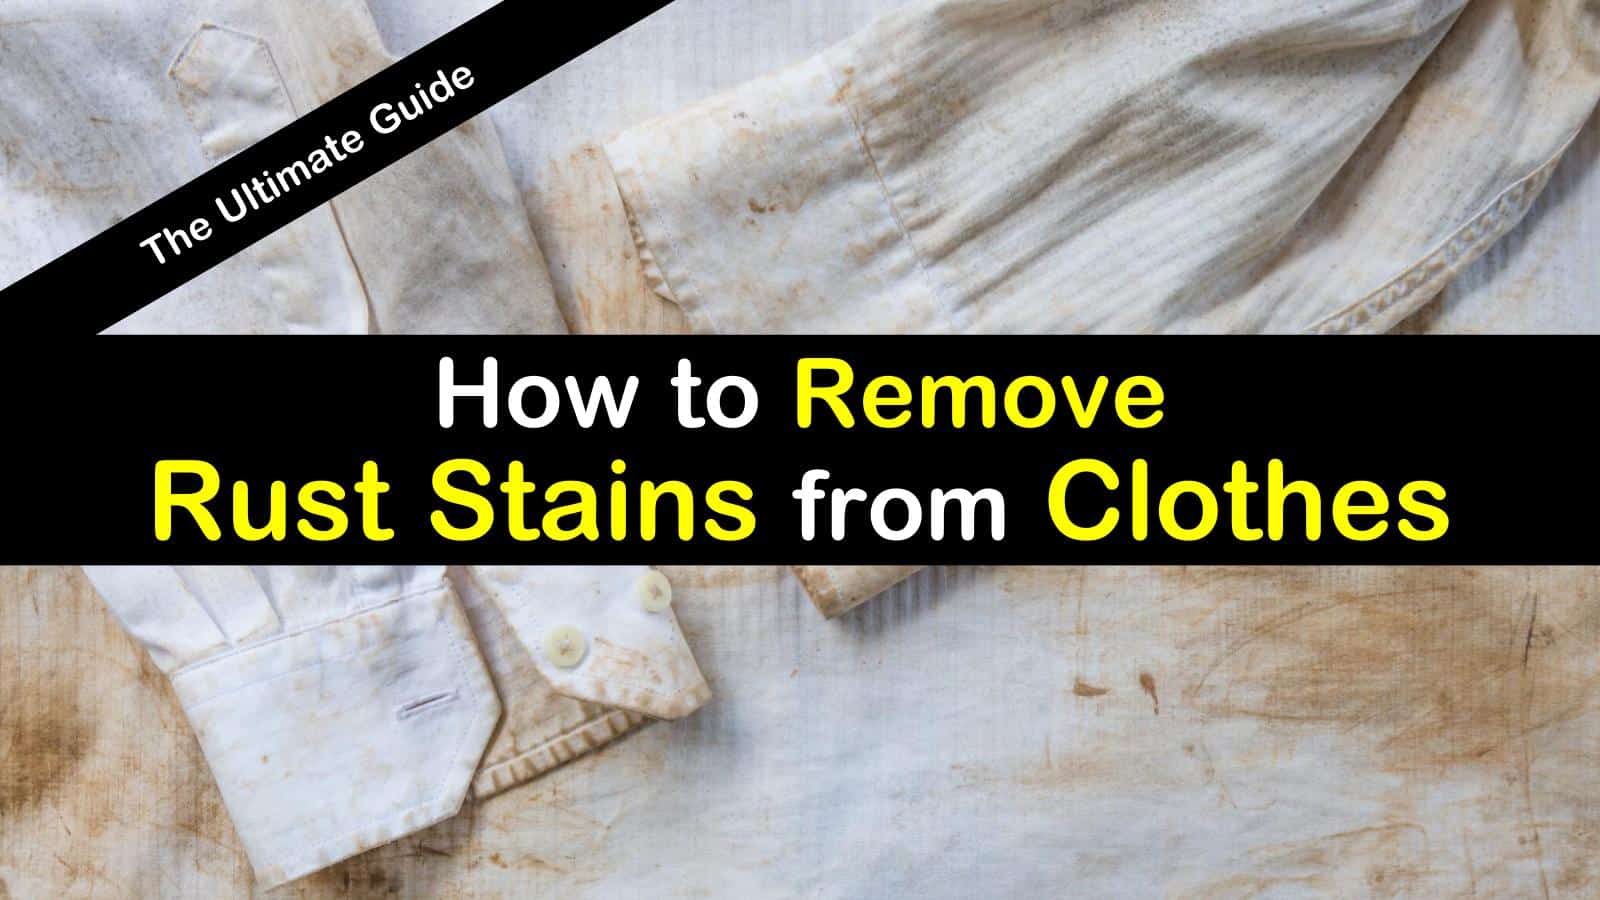 How to Remove Rust Stains from Clothes - The Ultimate Guide titleimg1